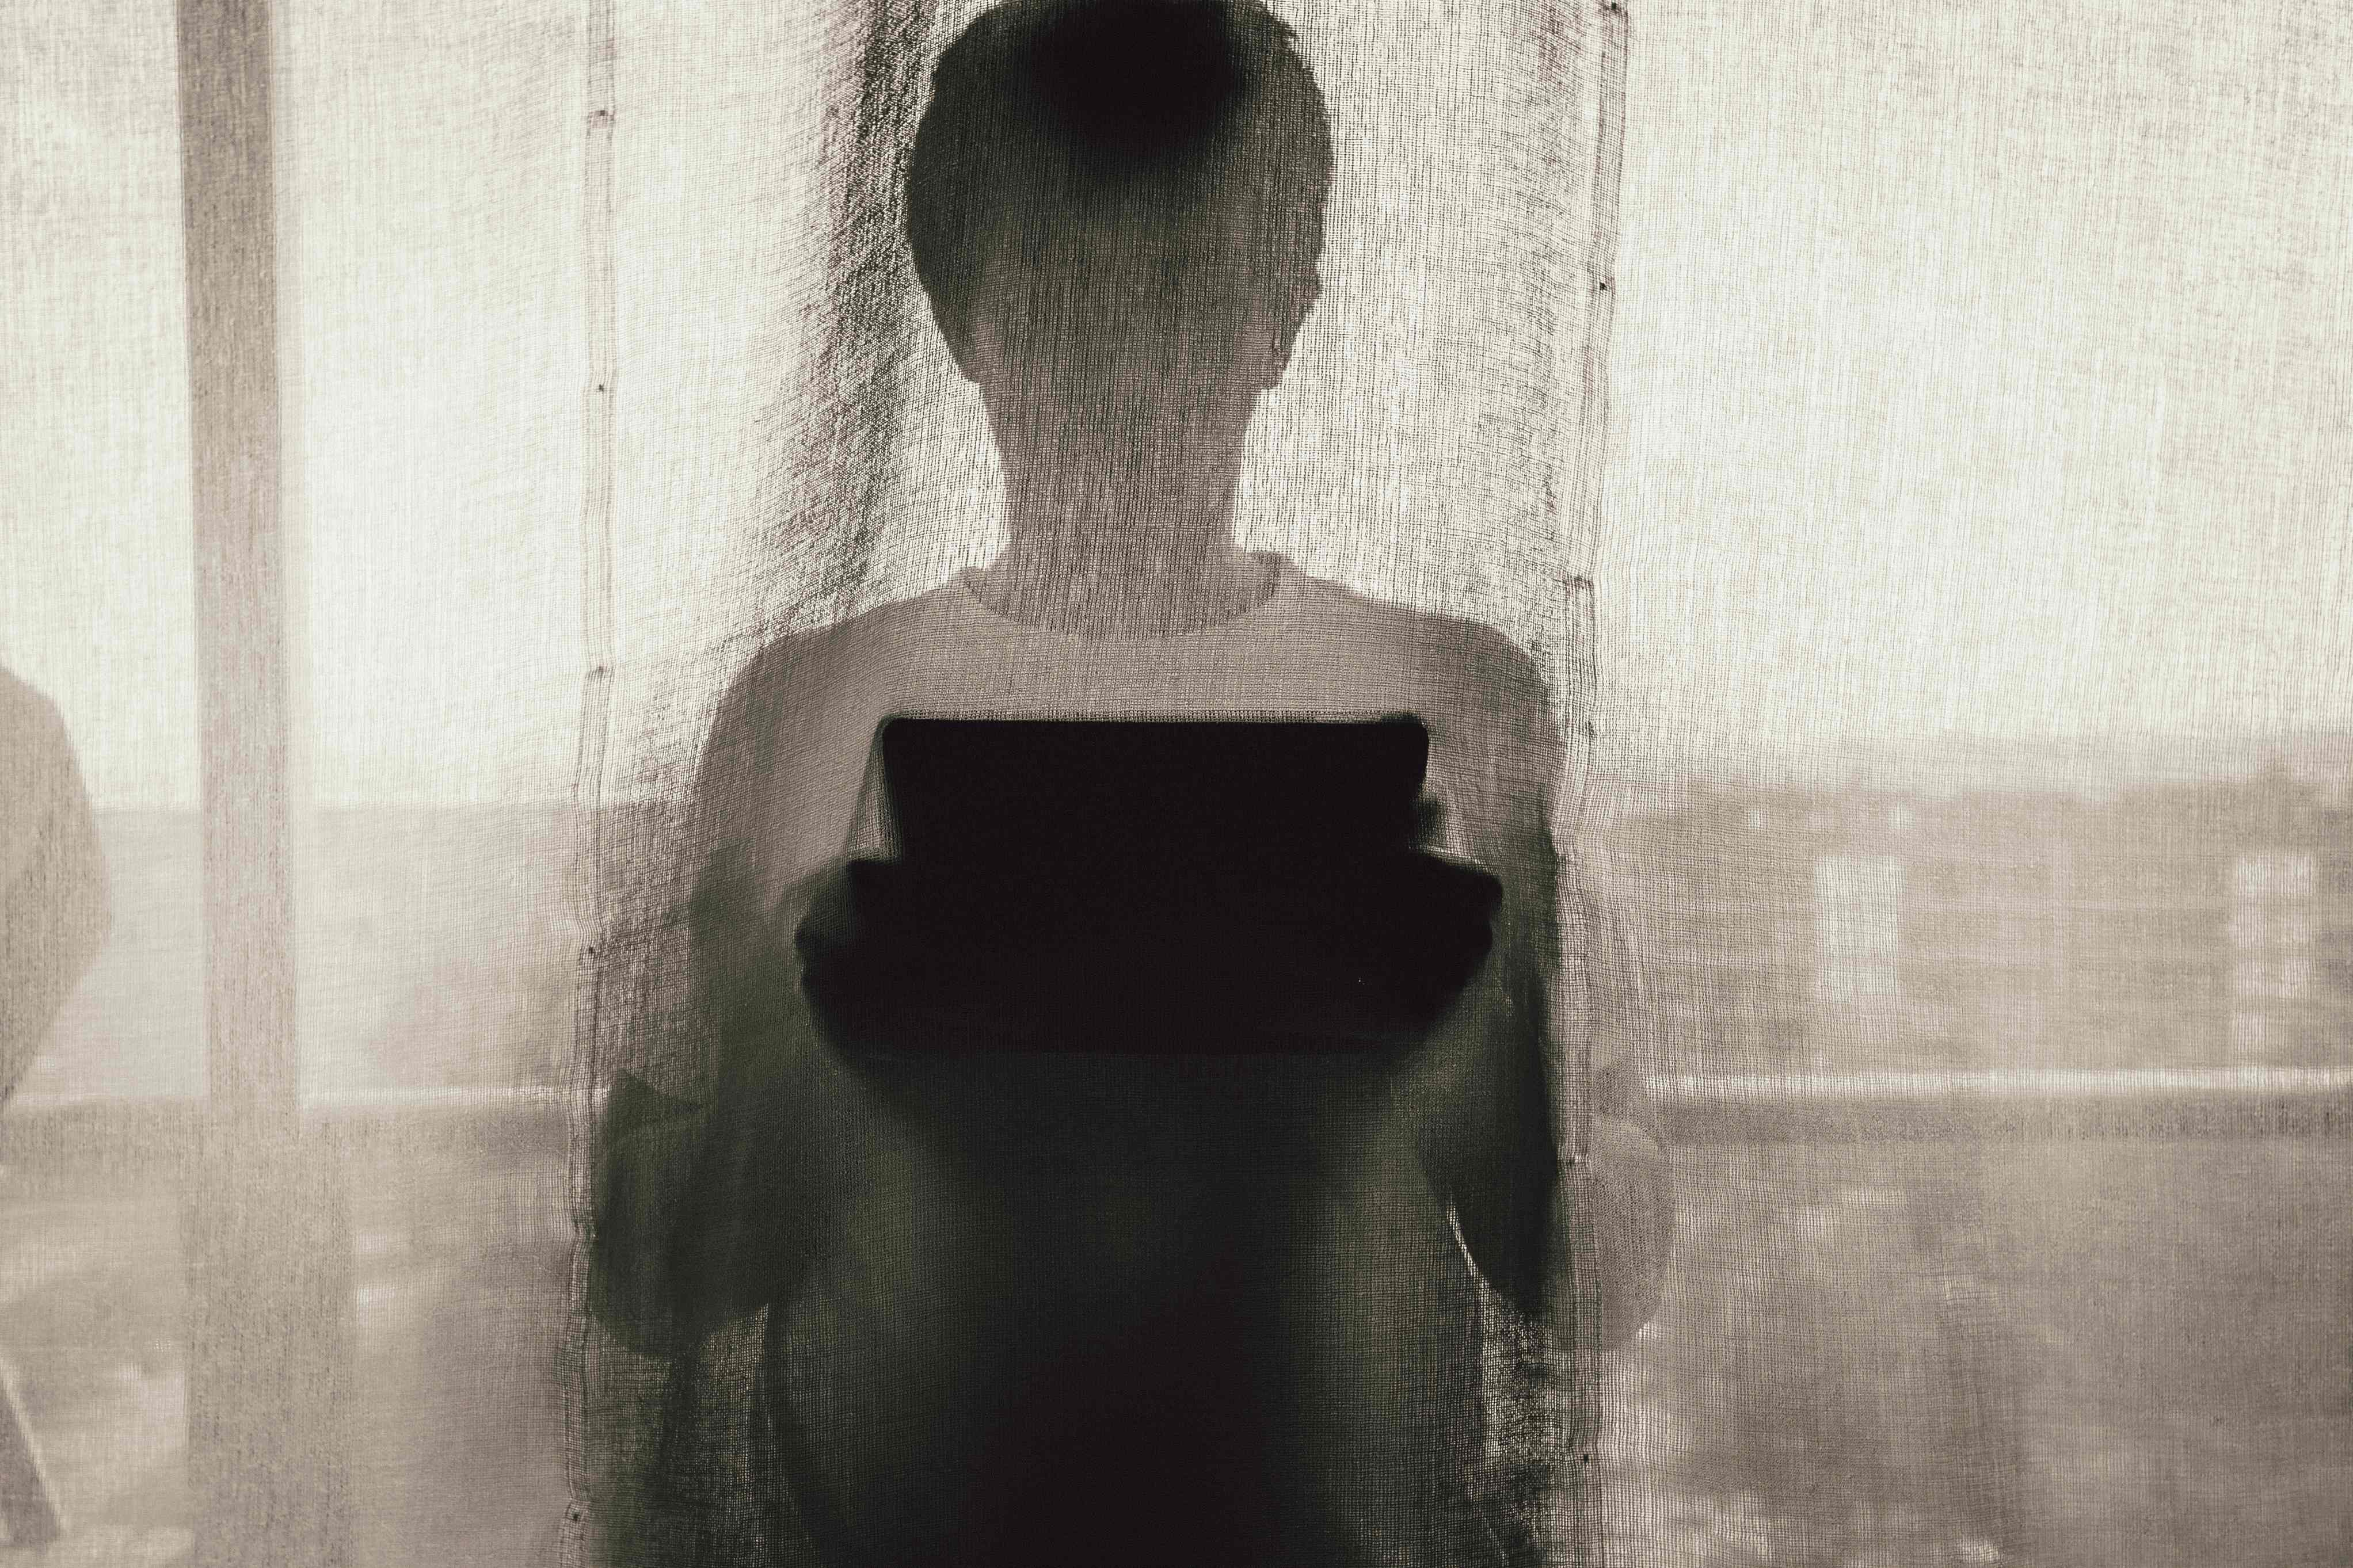 Juan Pablo Arenas Man Standing Holding A Tablet Behind Curtain